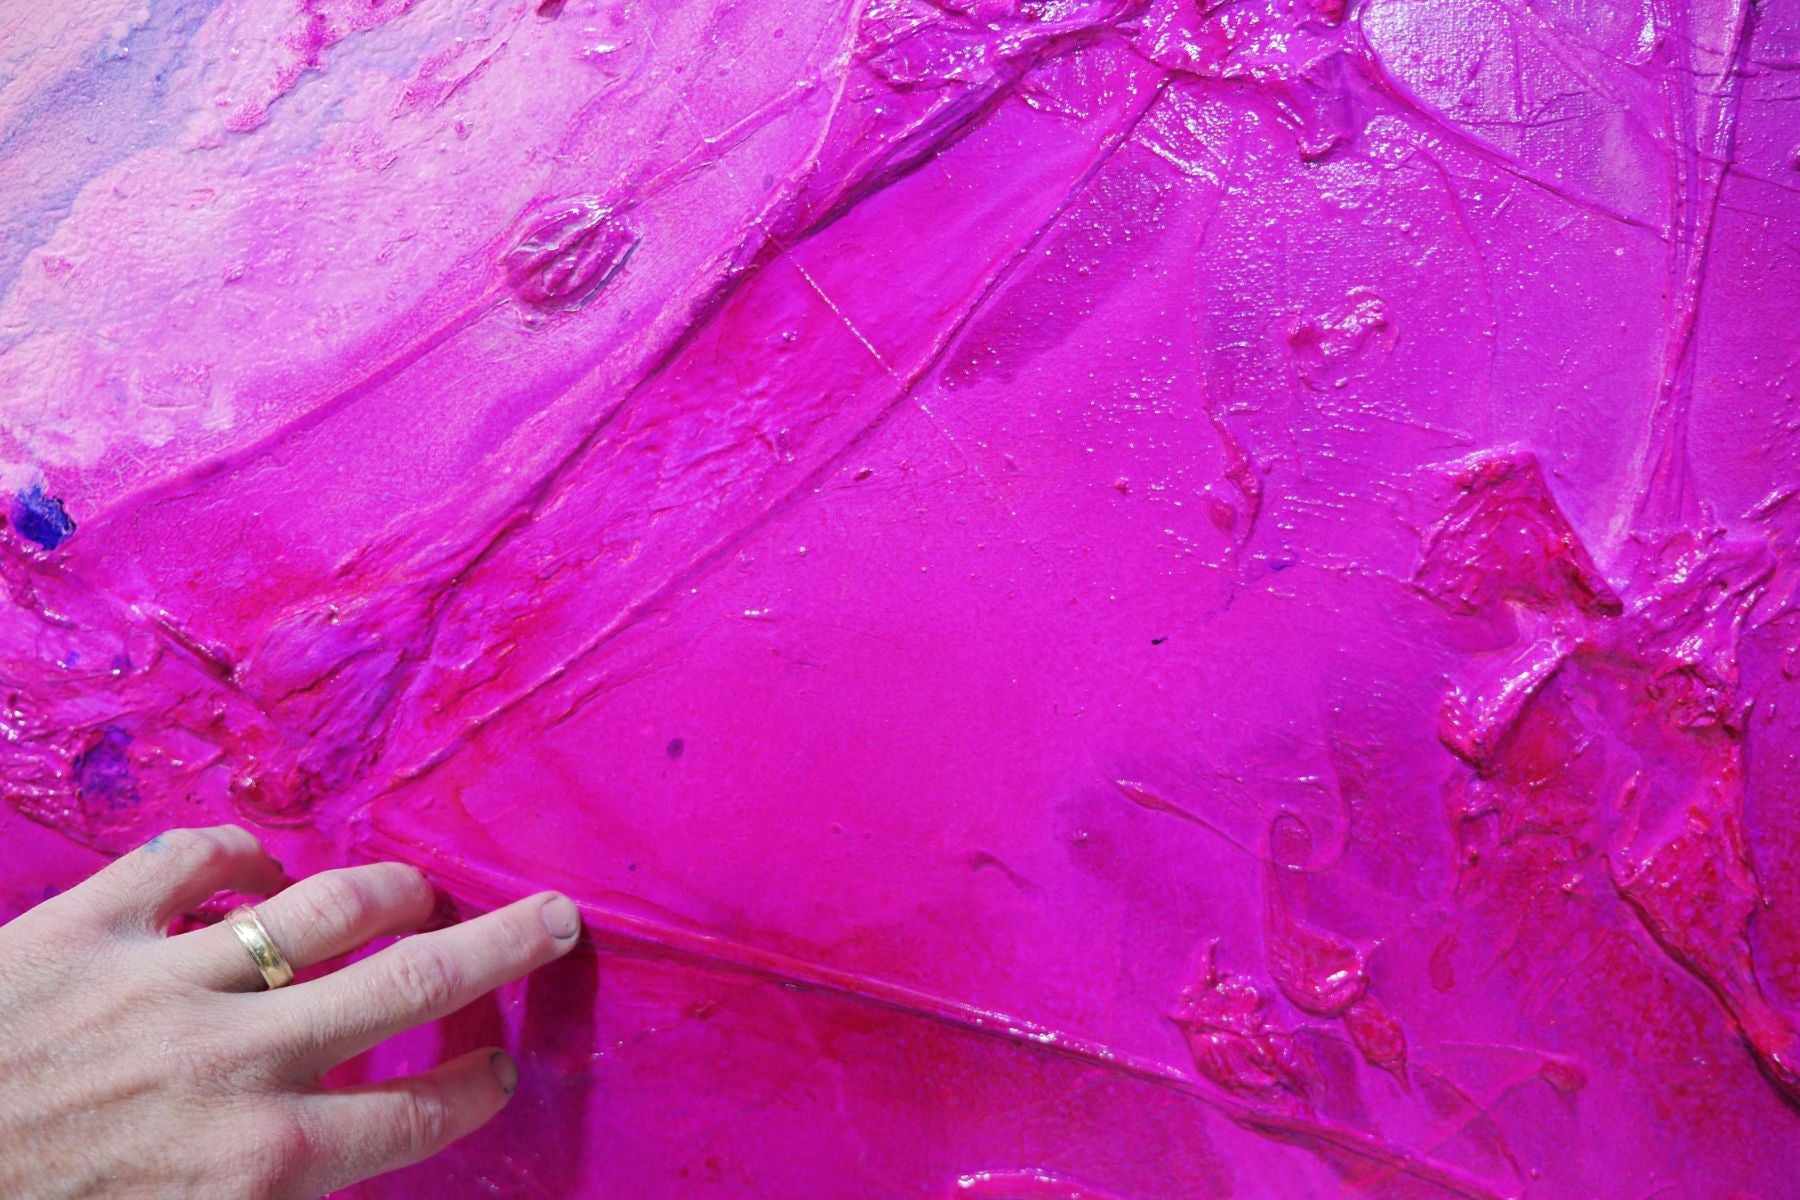 Atomic Samurai 240cm x 100cm Pink White Purple Textured Abstract Painting (SOLD)